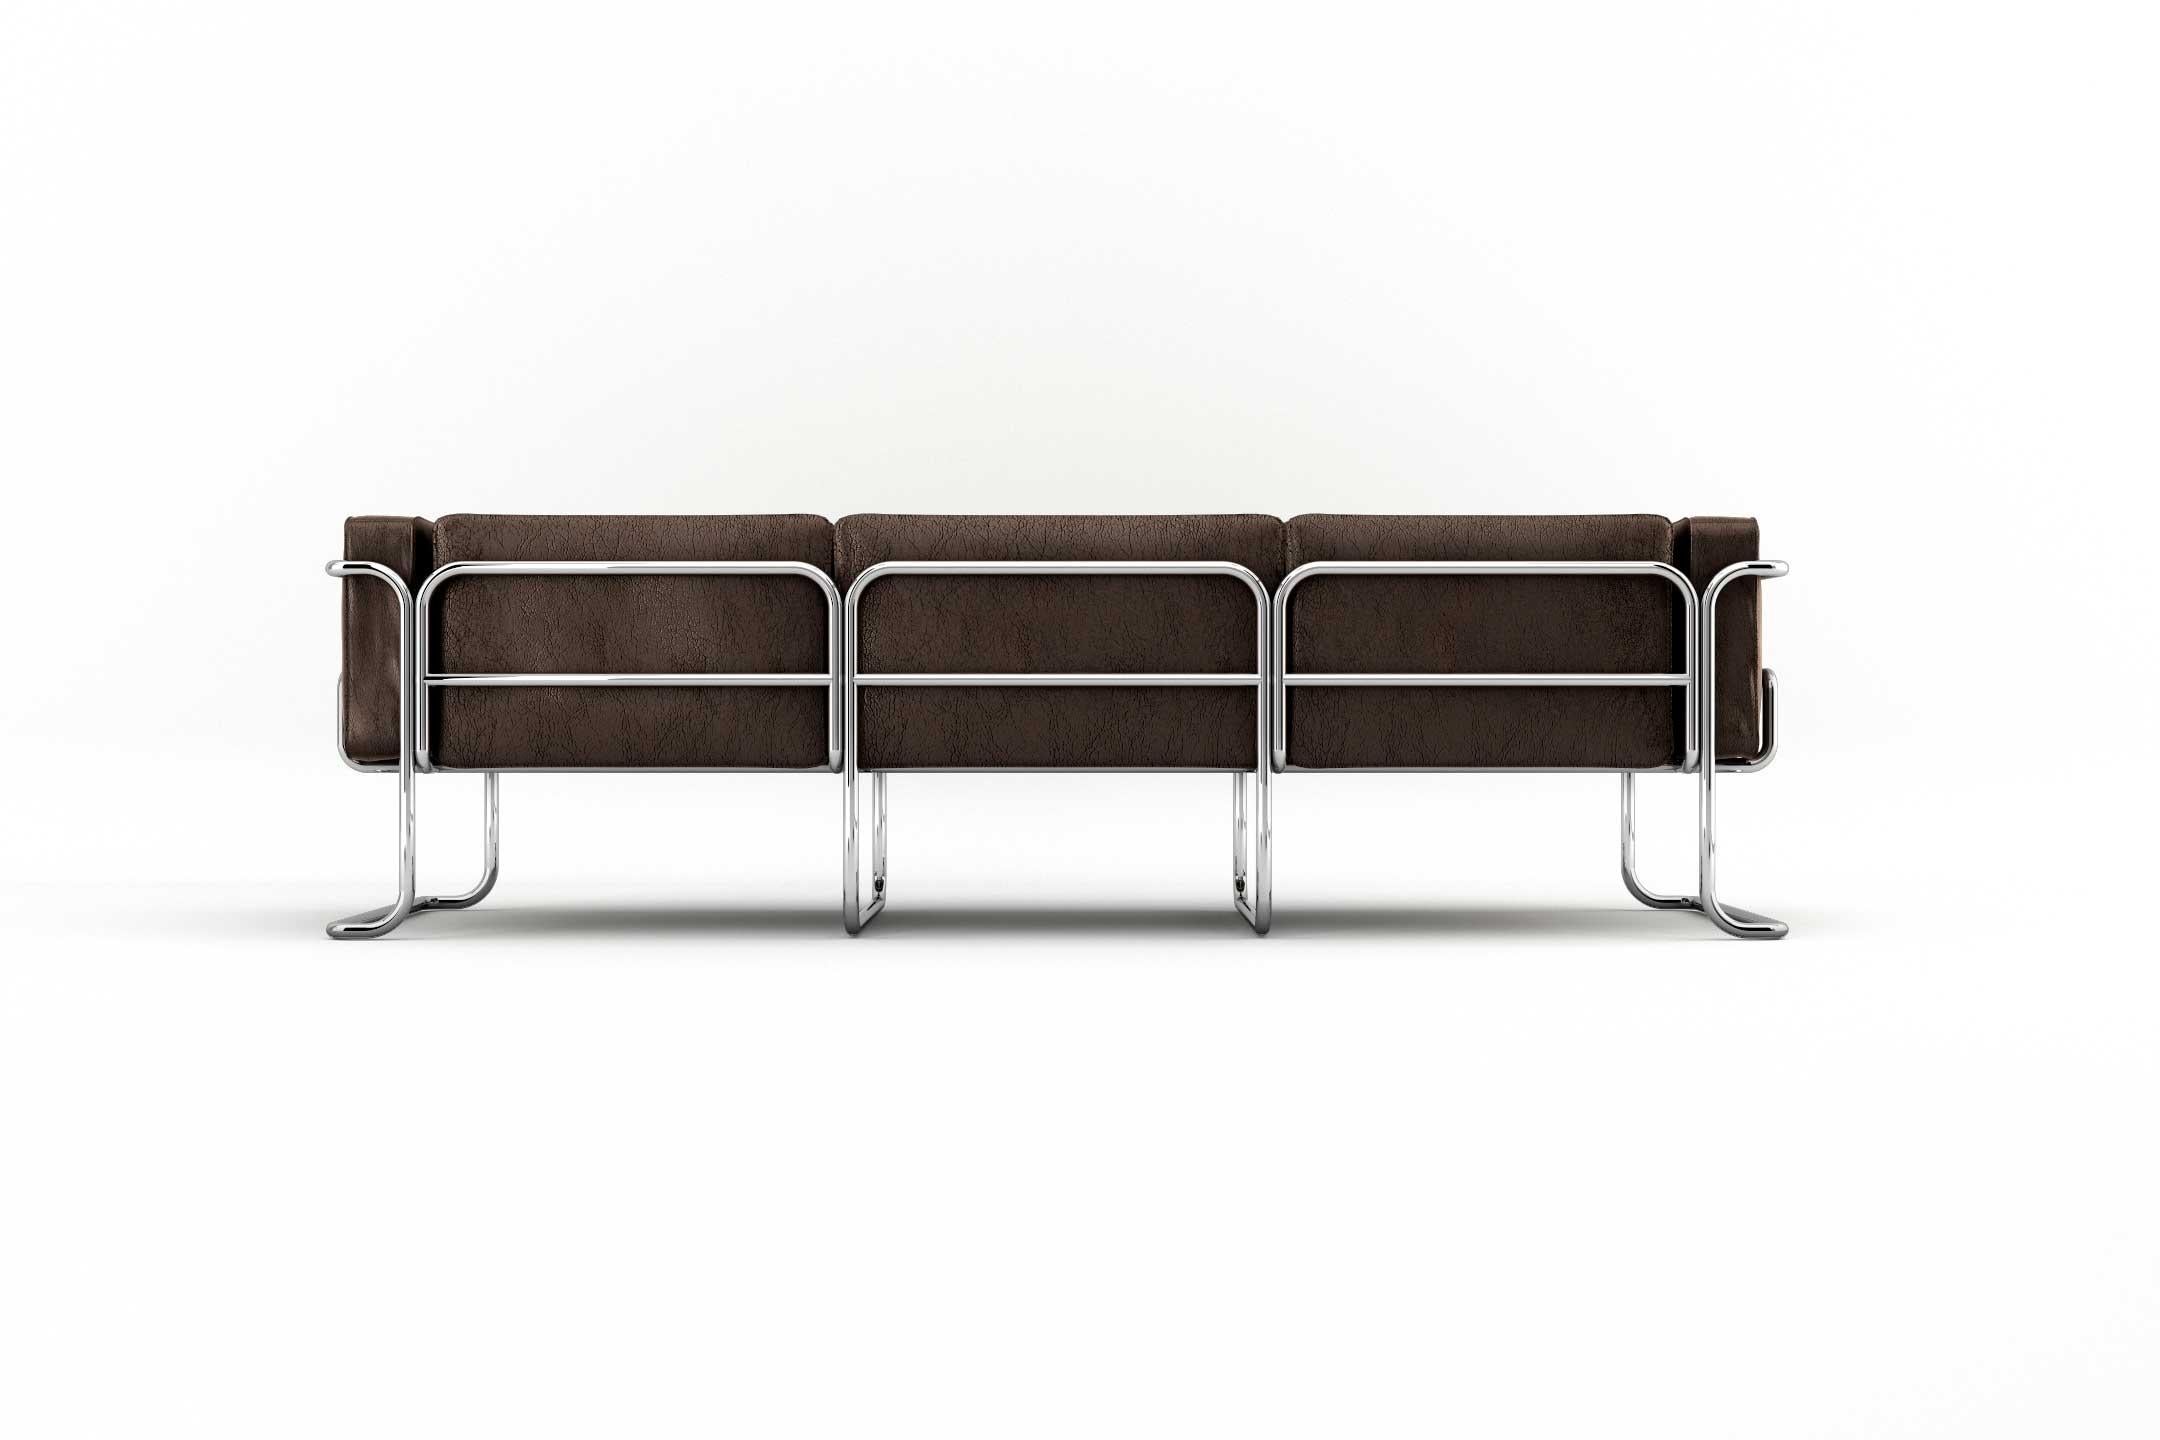 Lotus 3 Seat Sofa - Modern Brown Leather Sofa with Stainless Steel Legs In New Condition For Sale In London, GB